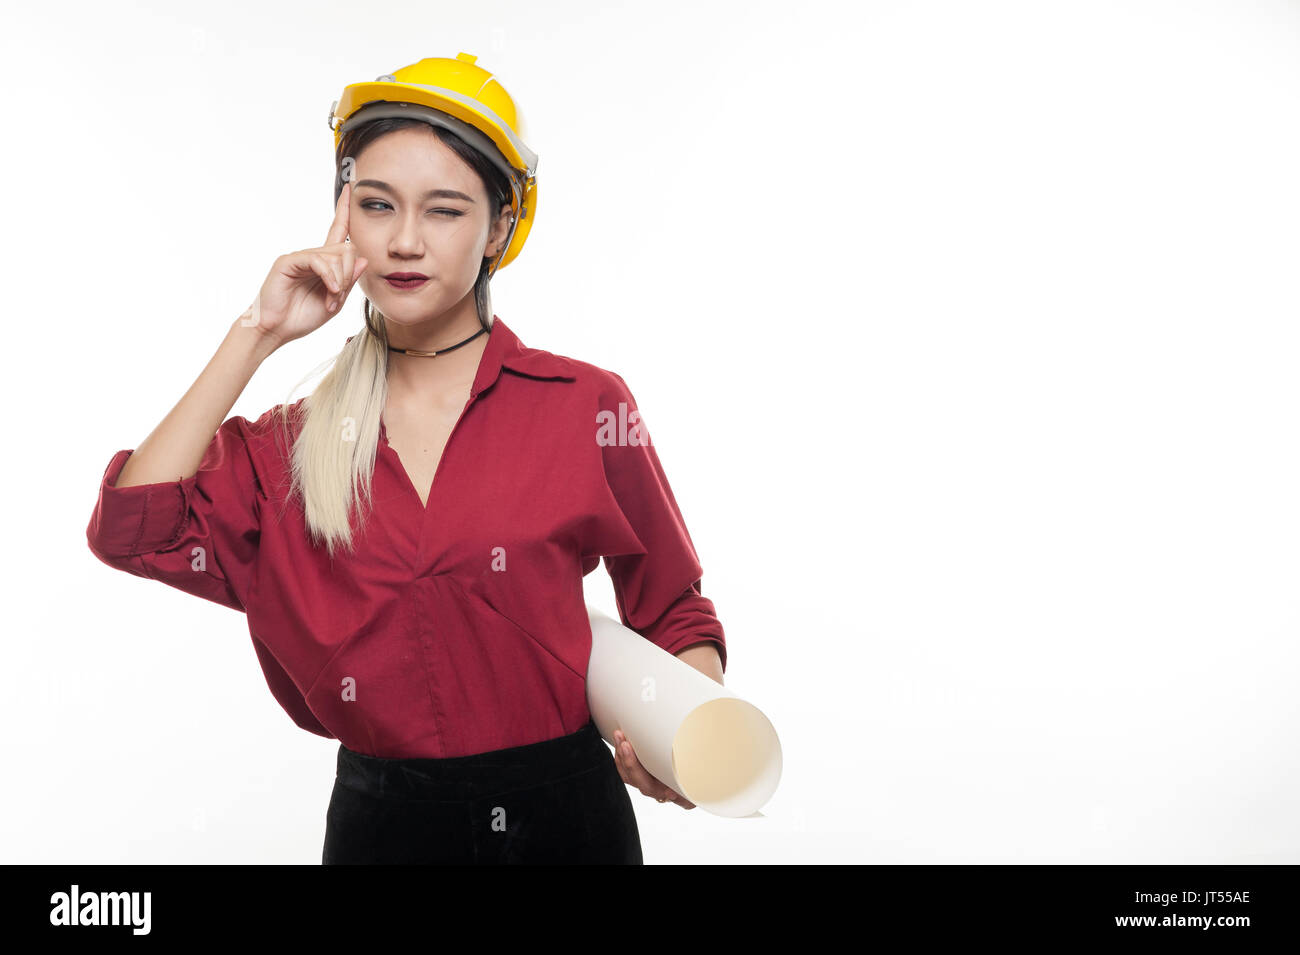 Young Asian woman architect with red shirt and yellow safety helmet thinking while carrying blueprints. Industrial occupation people concept Stock Photo